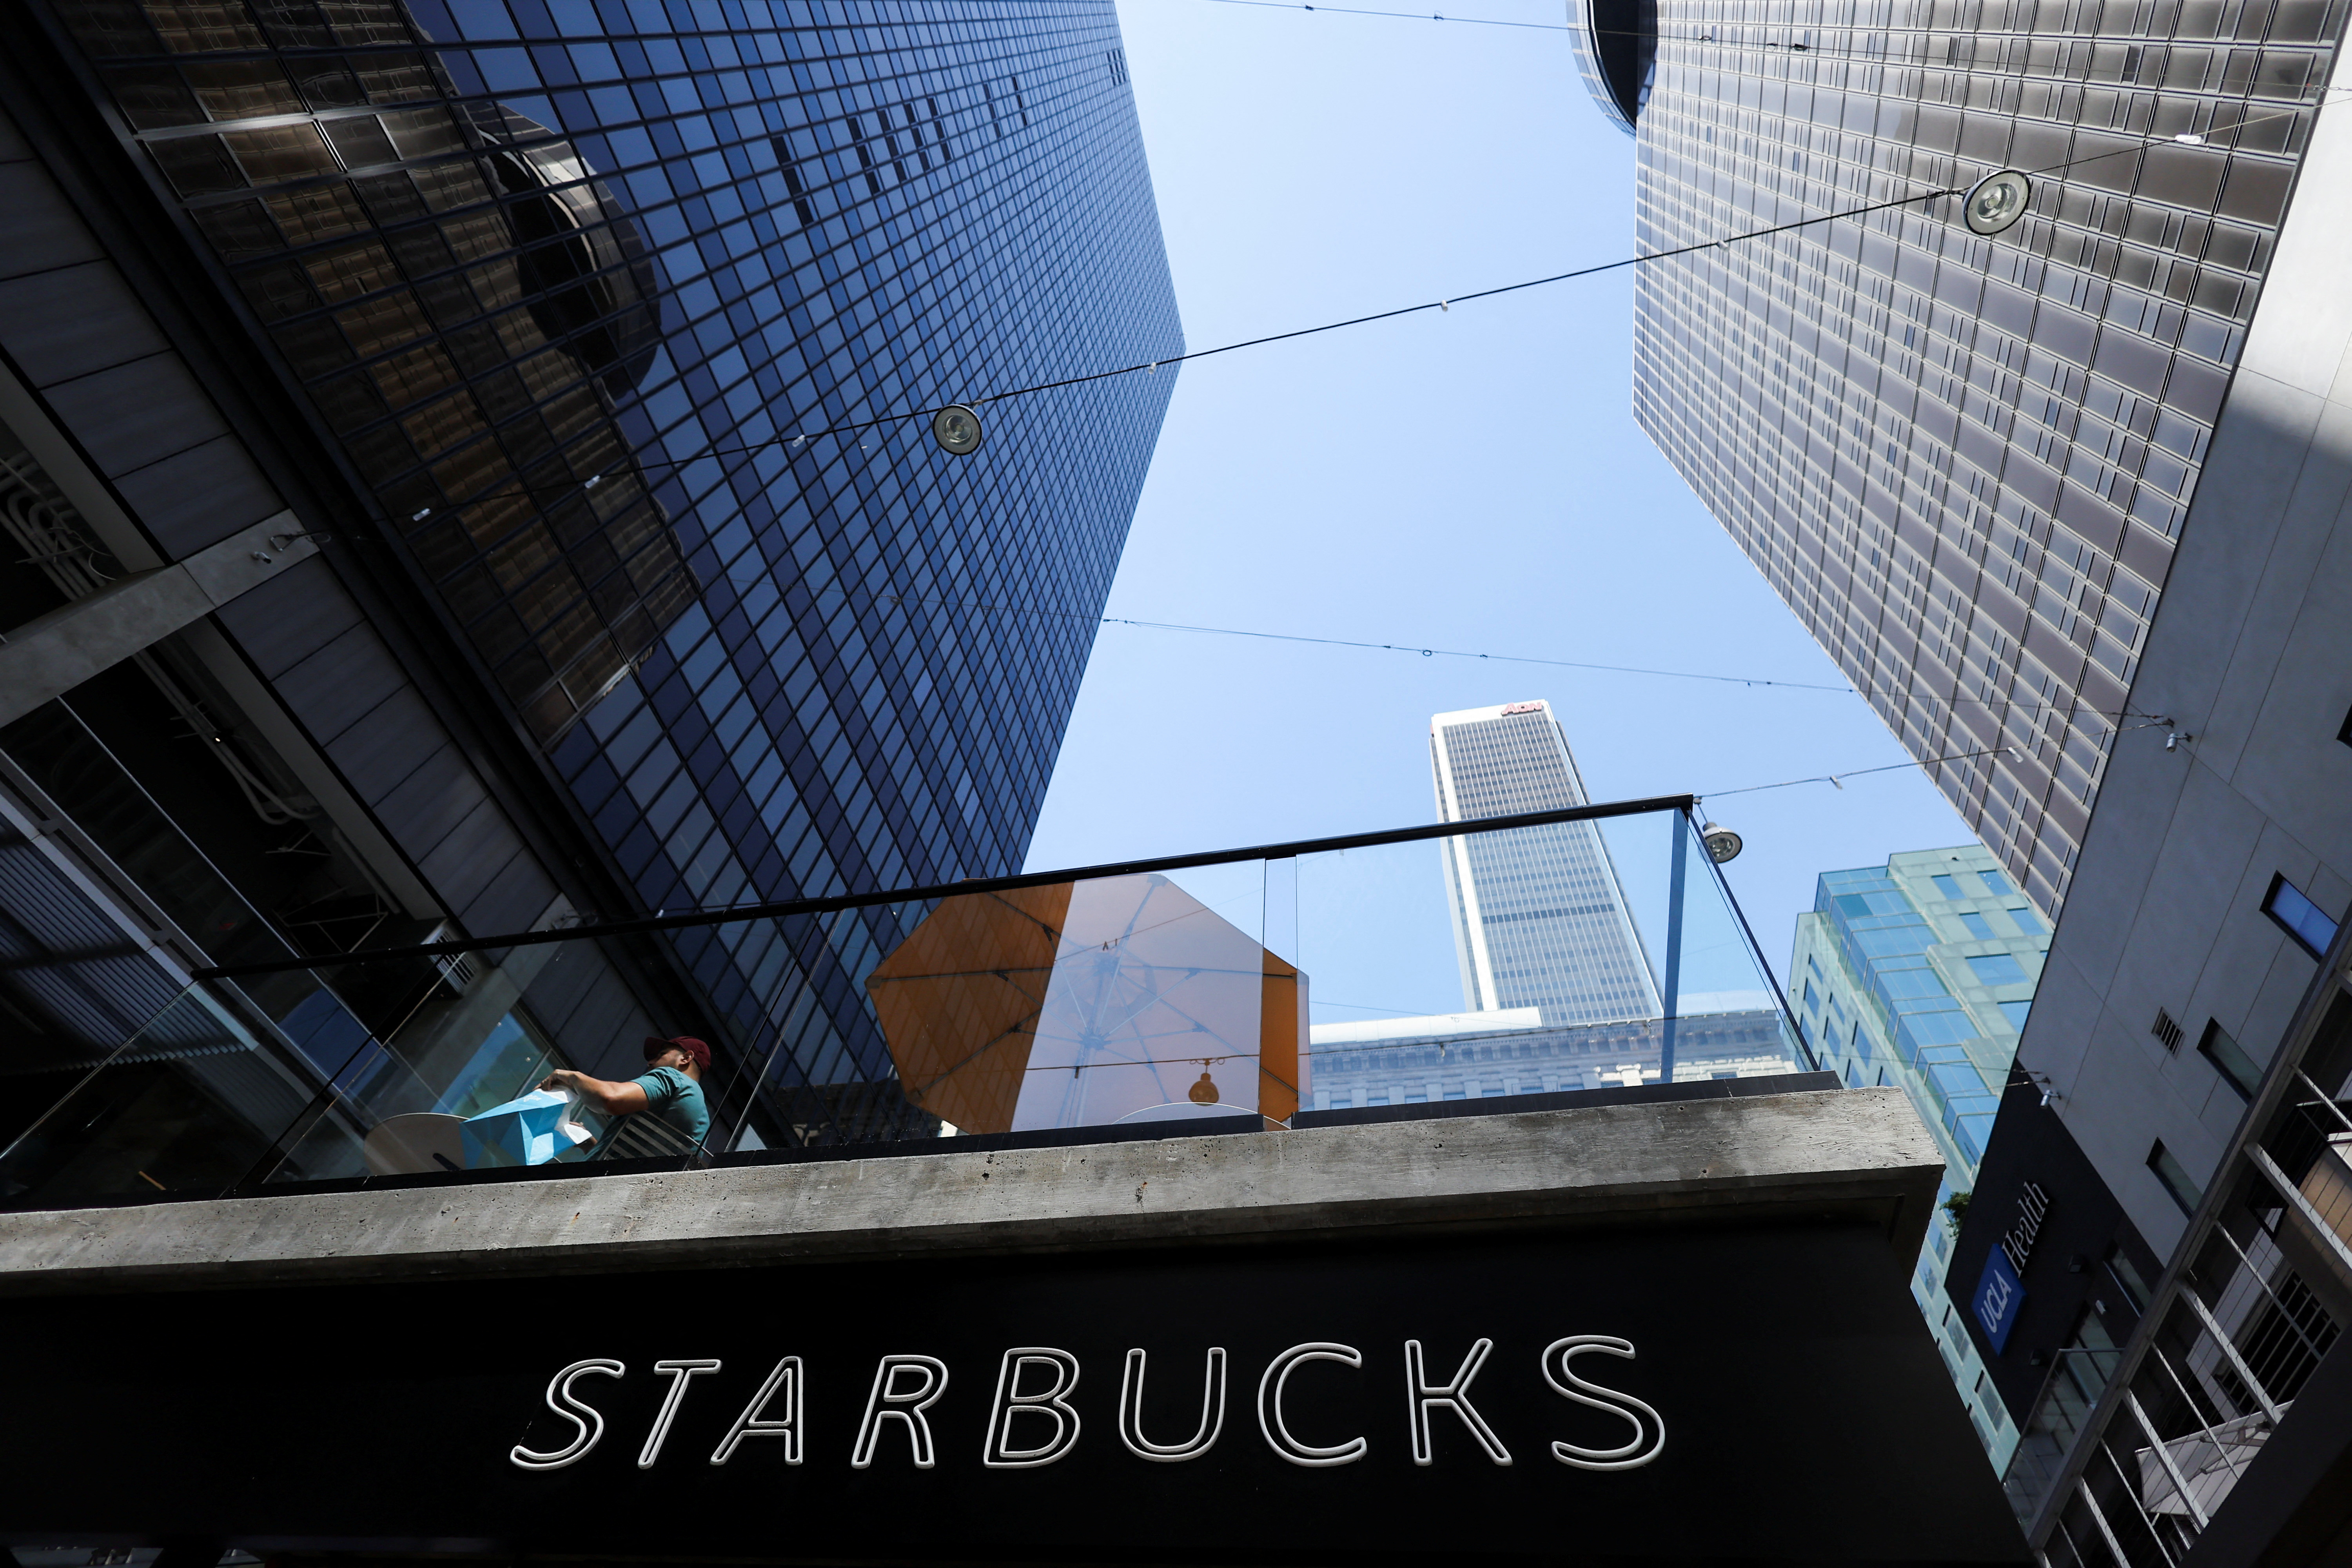 A Starbucks coffee shop is seen in downtown Los Angeles